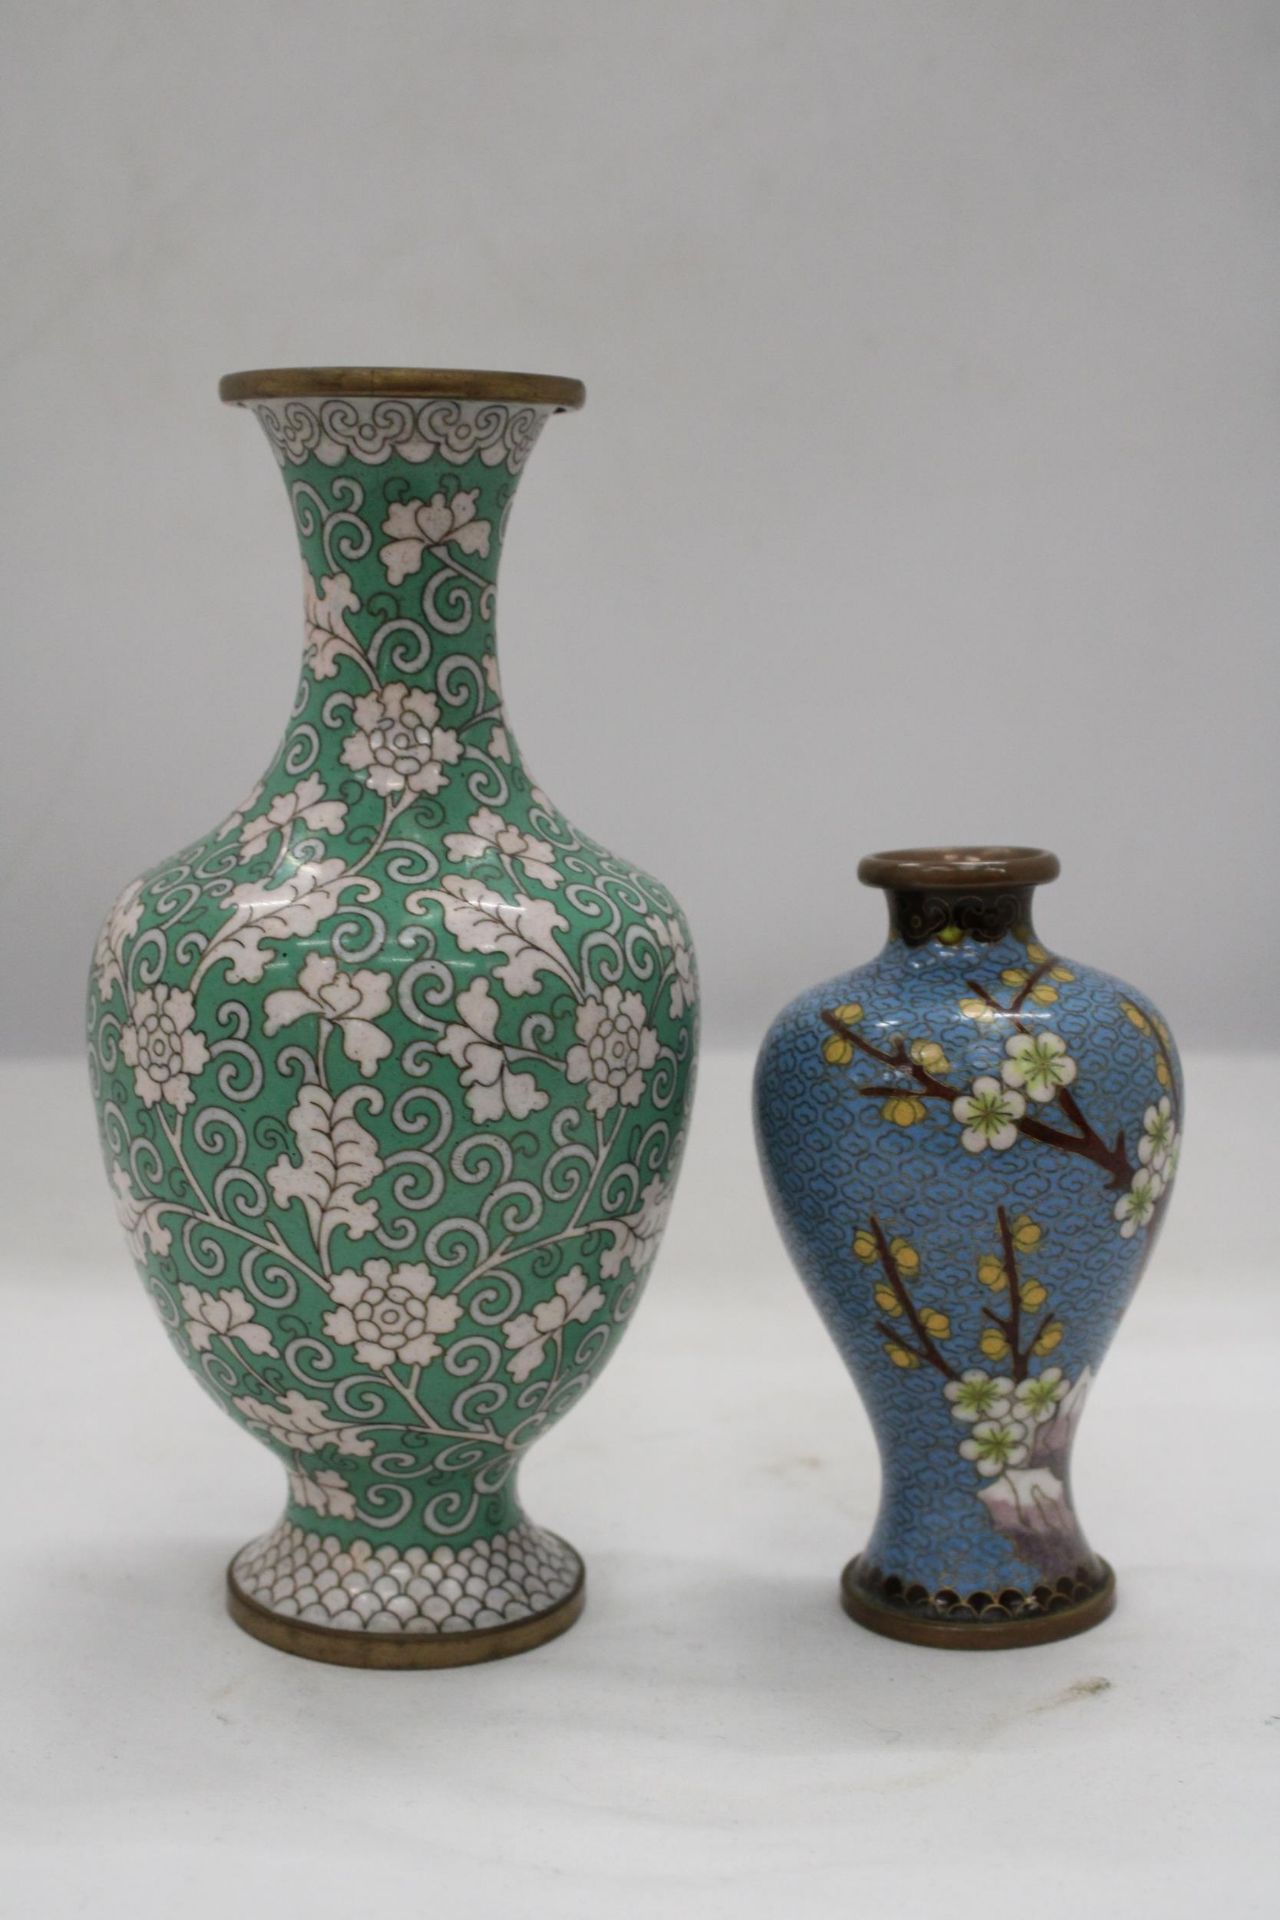 TWO ORIENTAL STYLE CLOISONNE VASES, HEIGHTS 21CM AND 13CM - Image 5 of 5